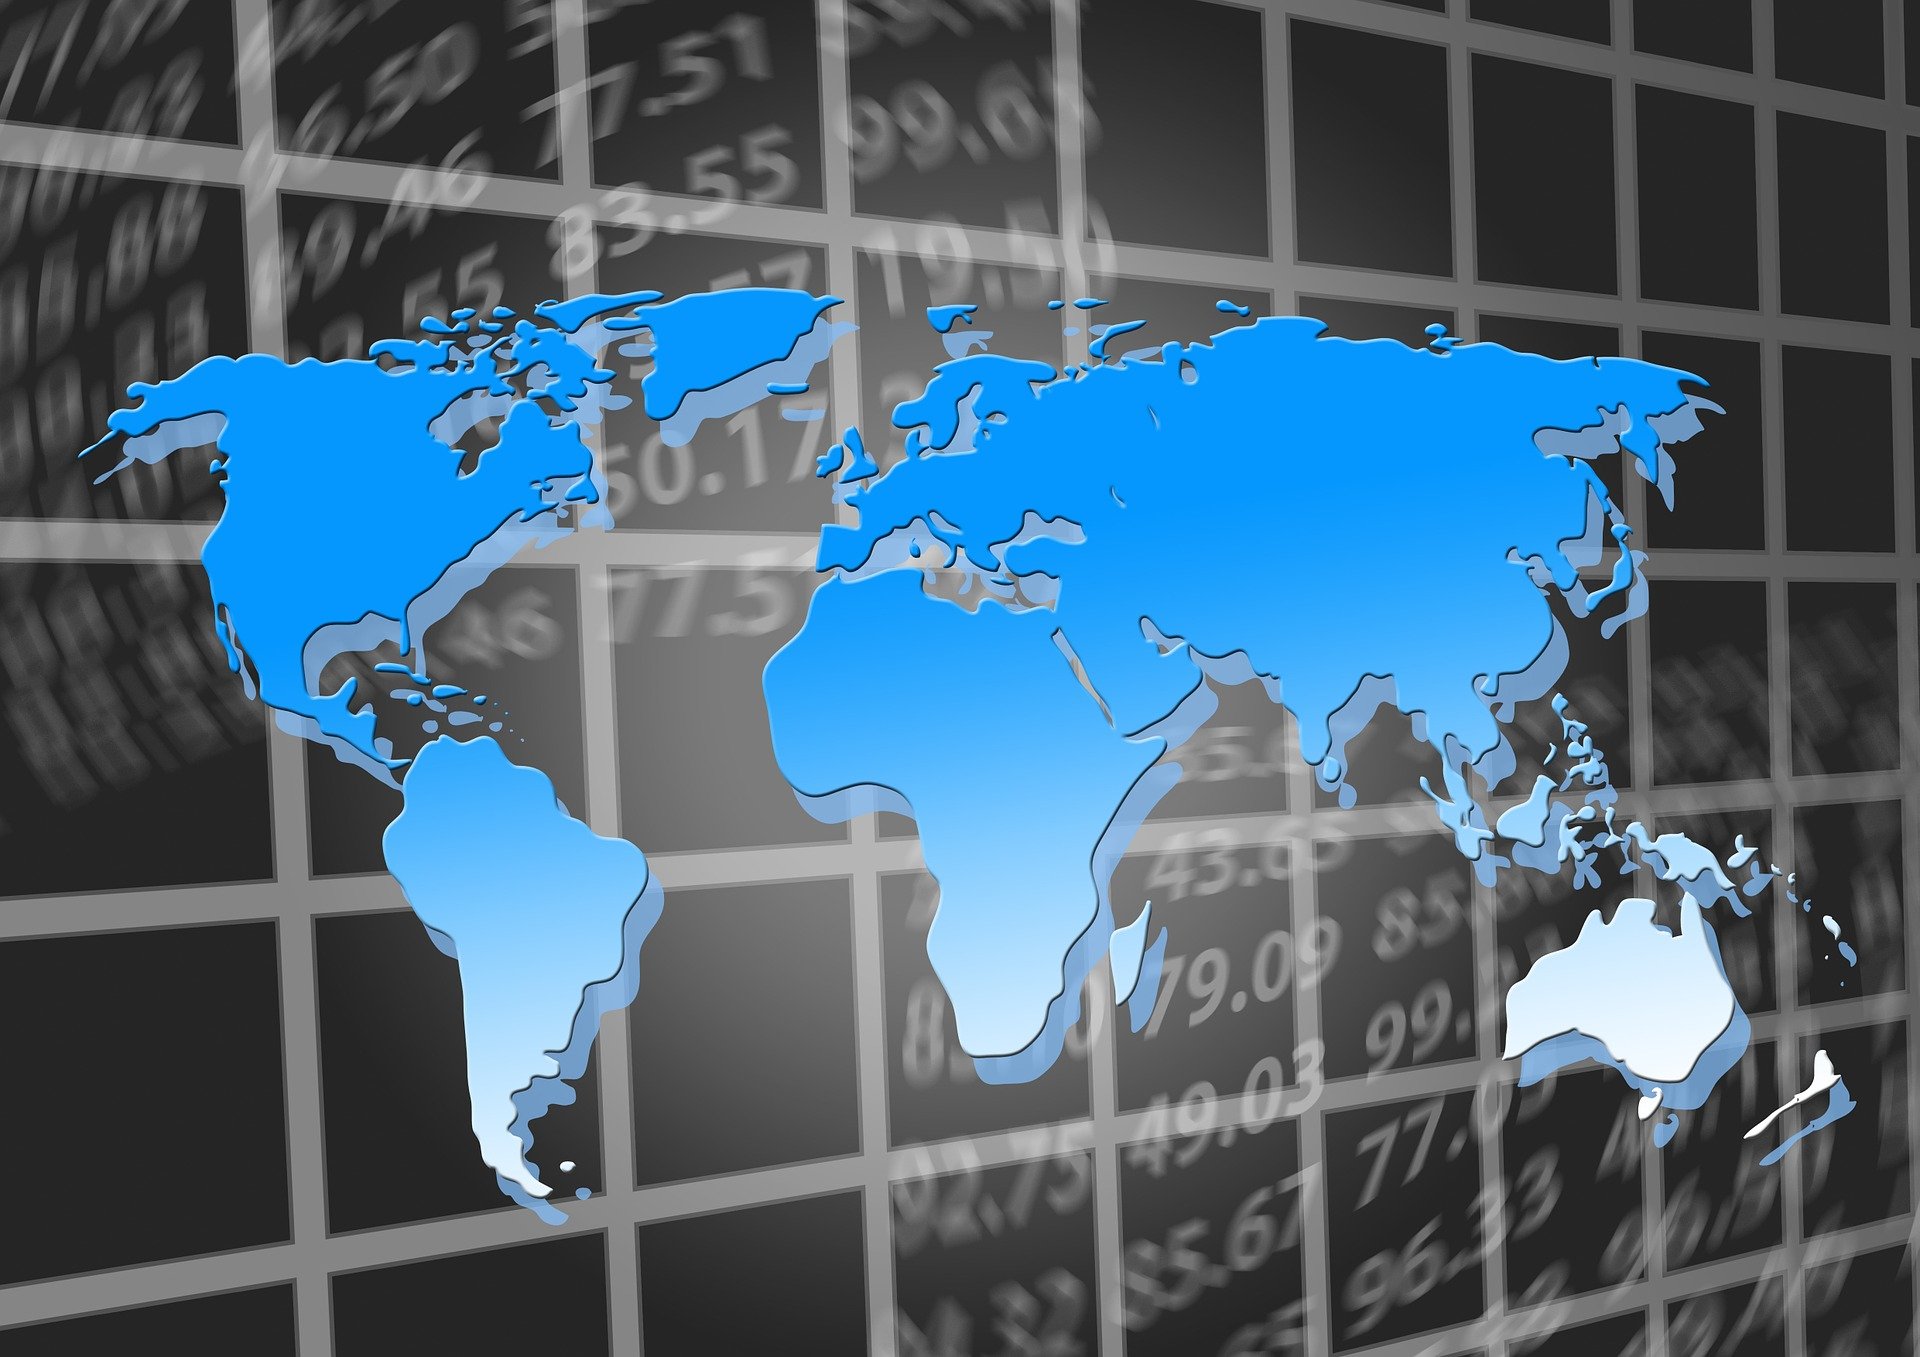 Top 5 Benefits of Localization for Your Business